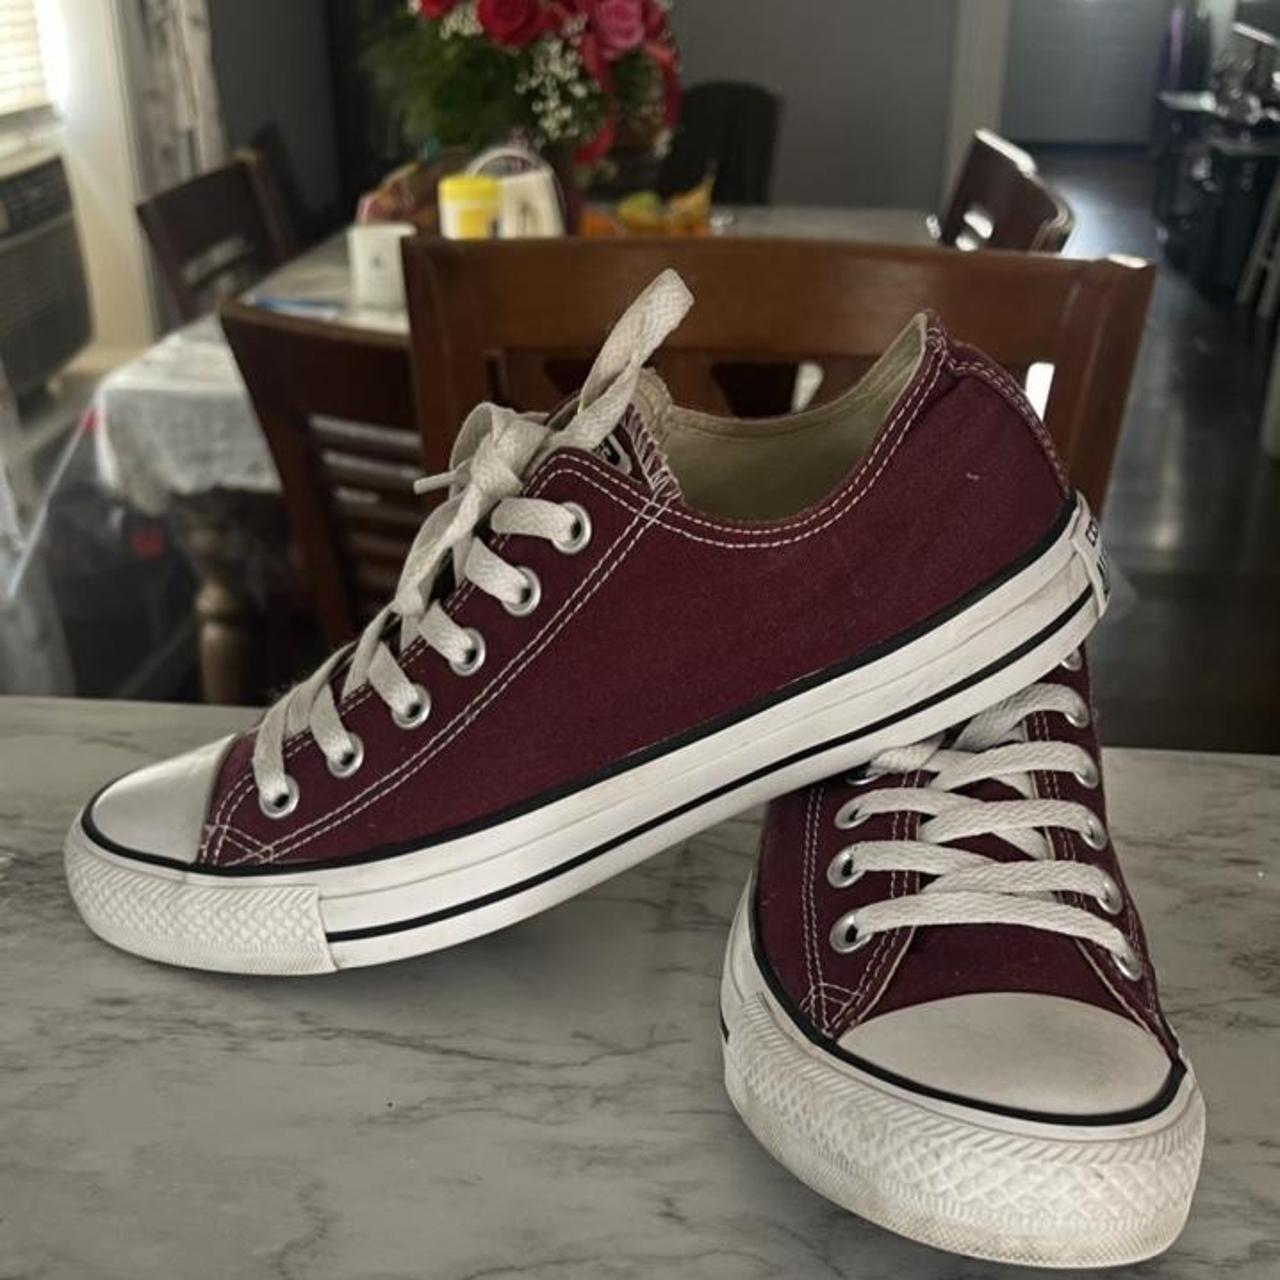 Converse Women's Burgundy and White Trainers | Depop